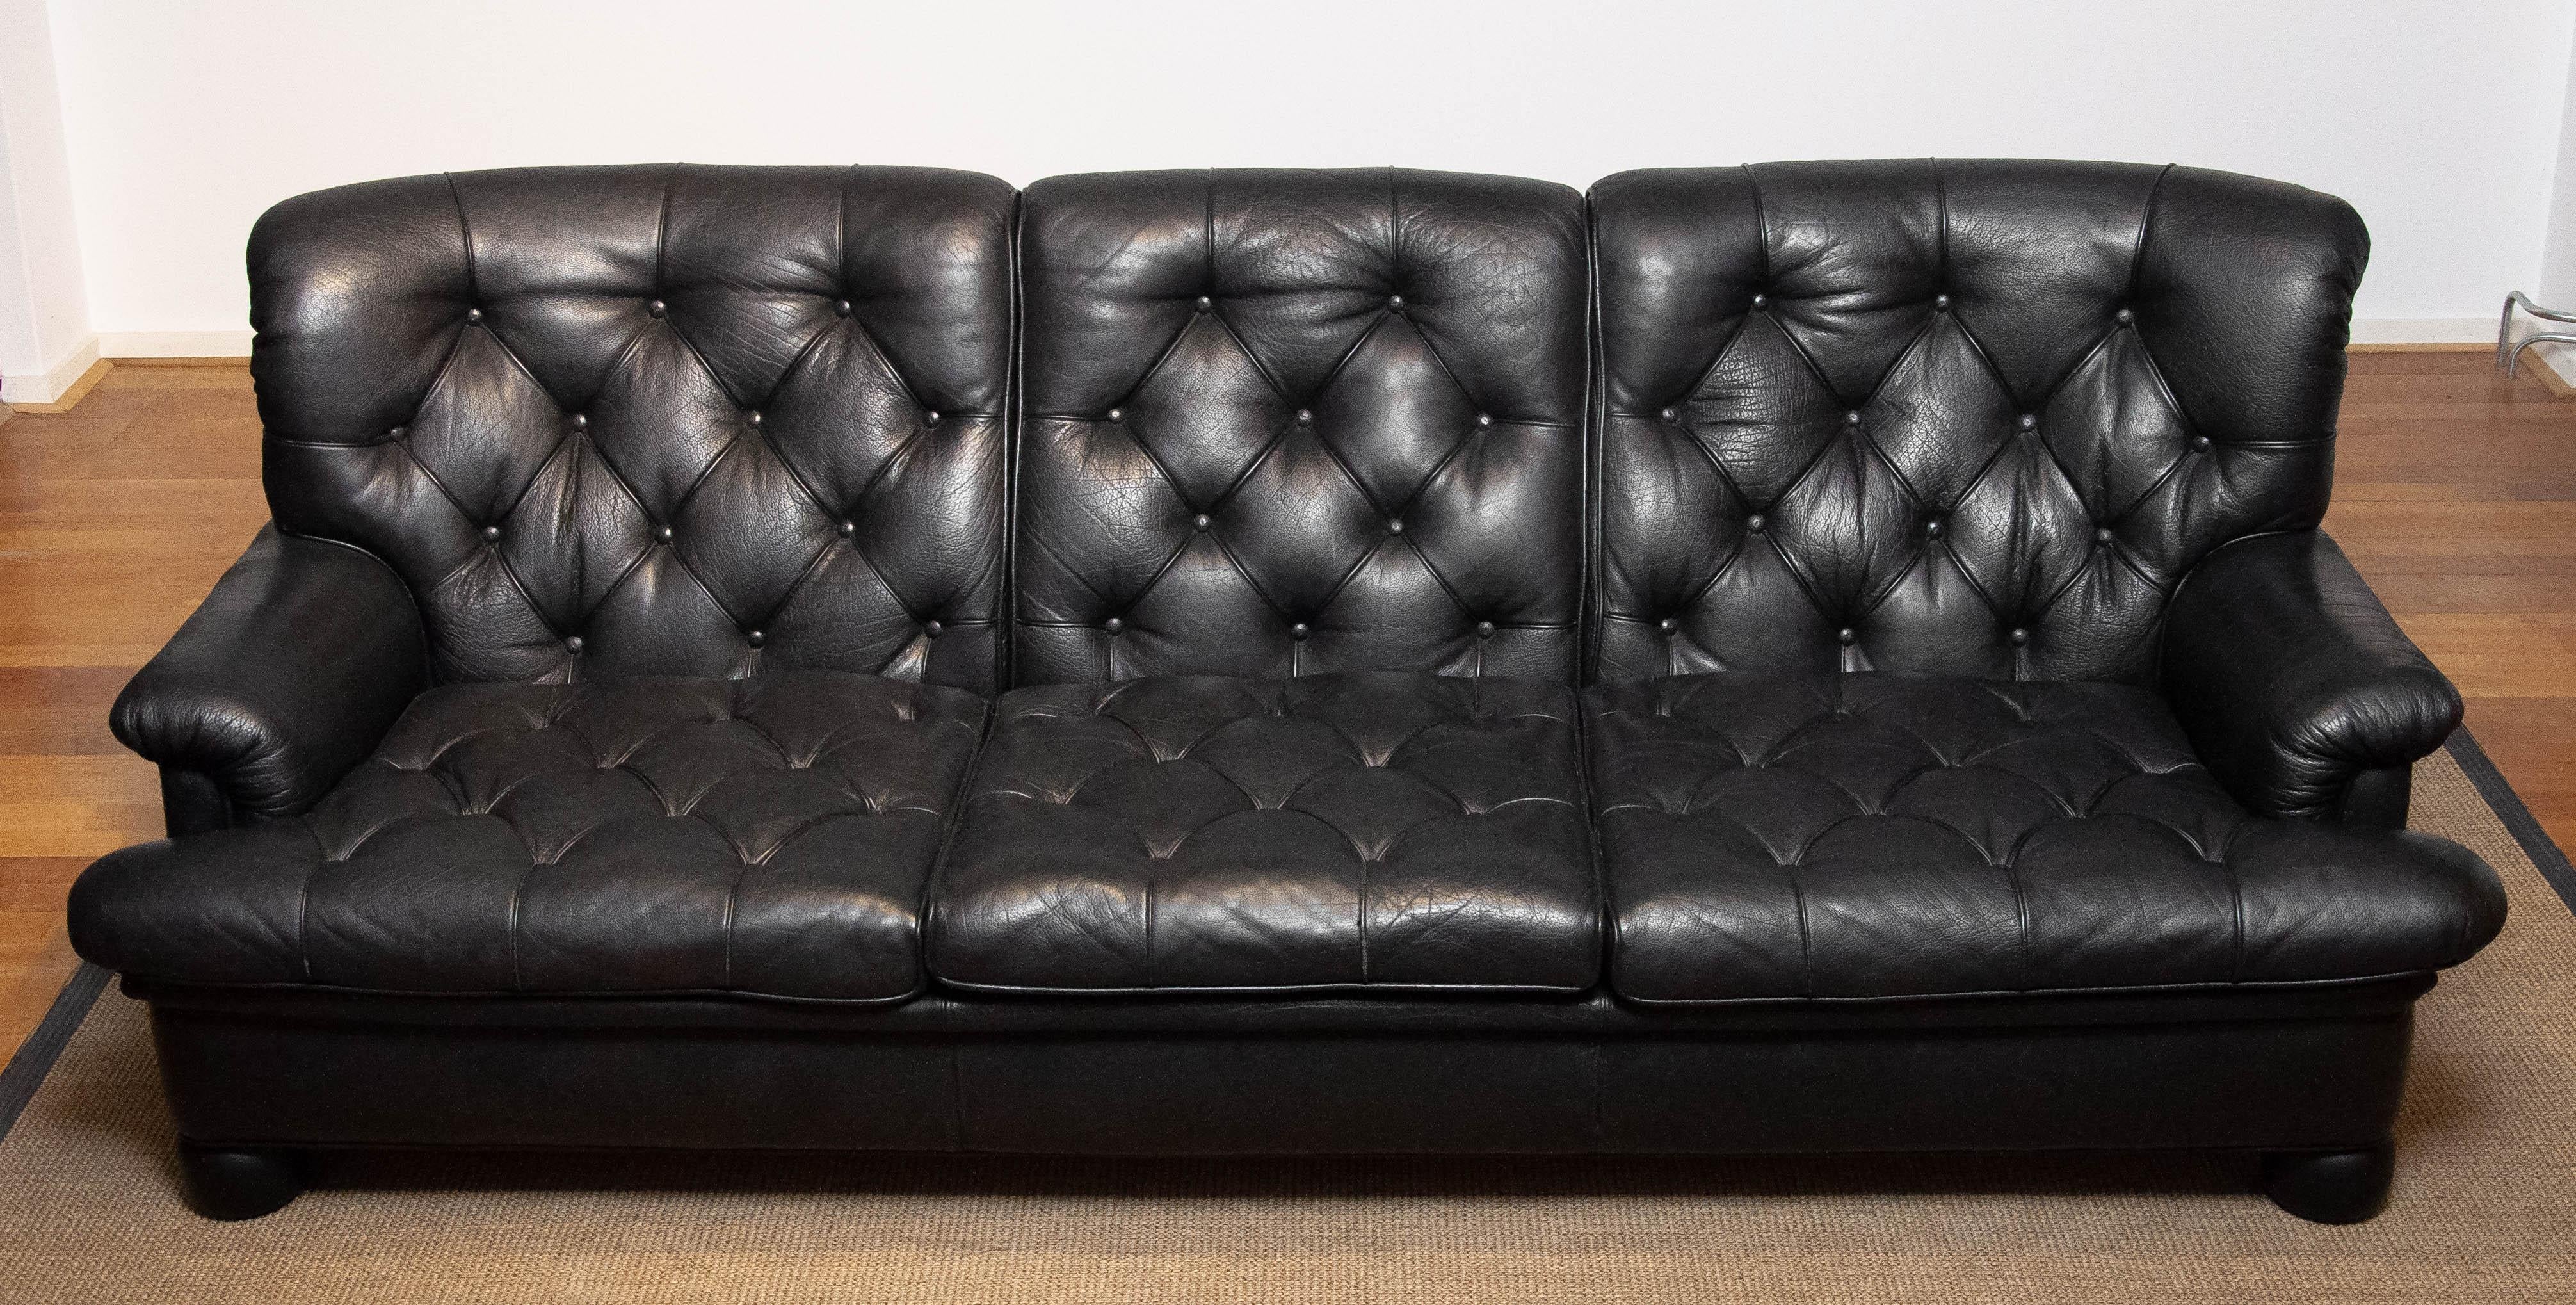 Mid-20th Century 1960 Black Leather Chesterfield Model 'Jupiter' Three Seater Sofa by Arne Norell For Sale